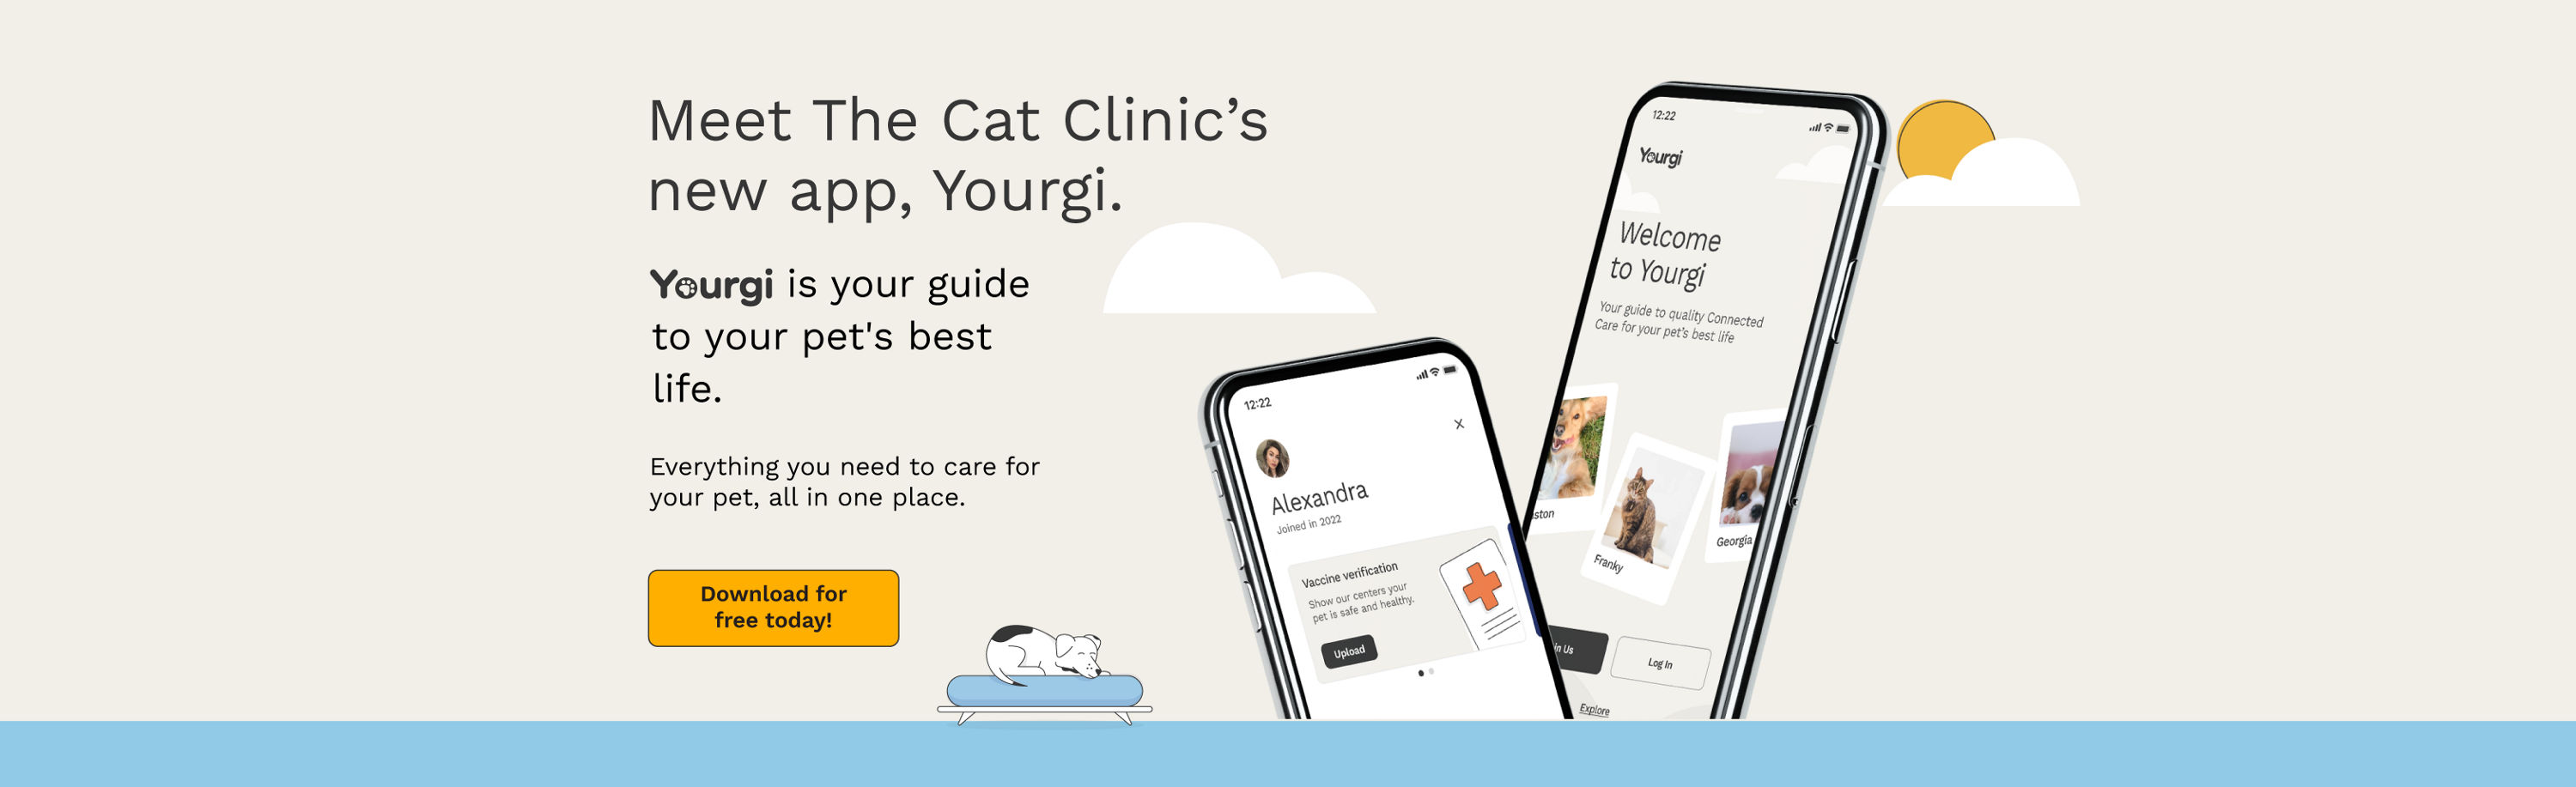 Meet The Cat Clinic's new app, Yourgi.